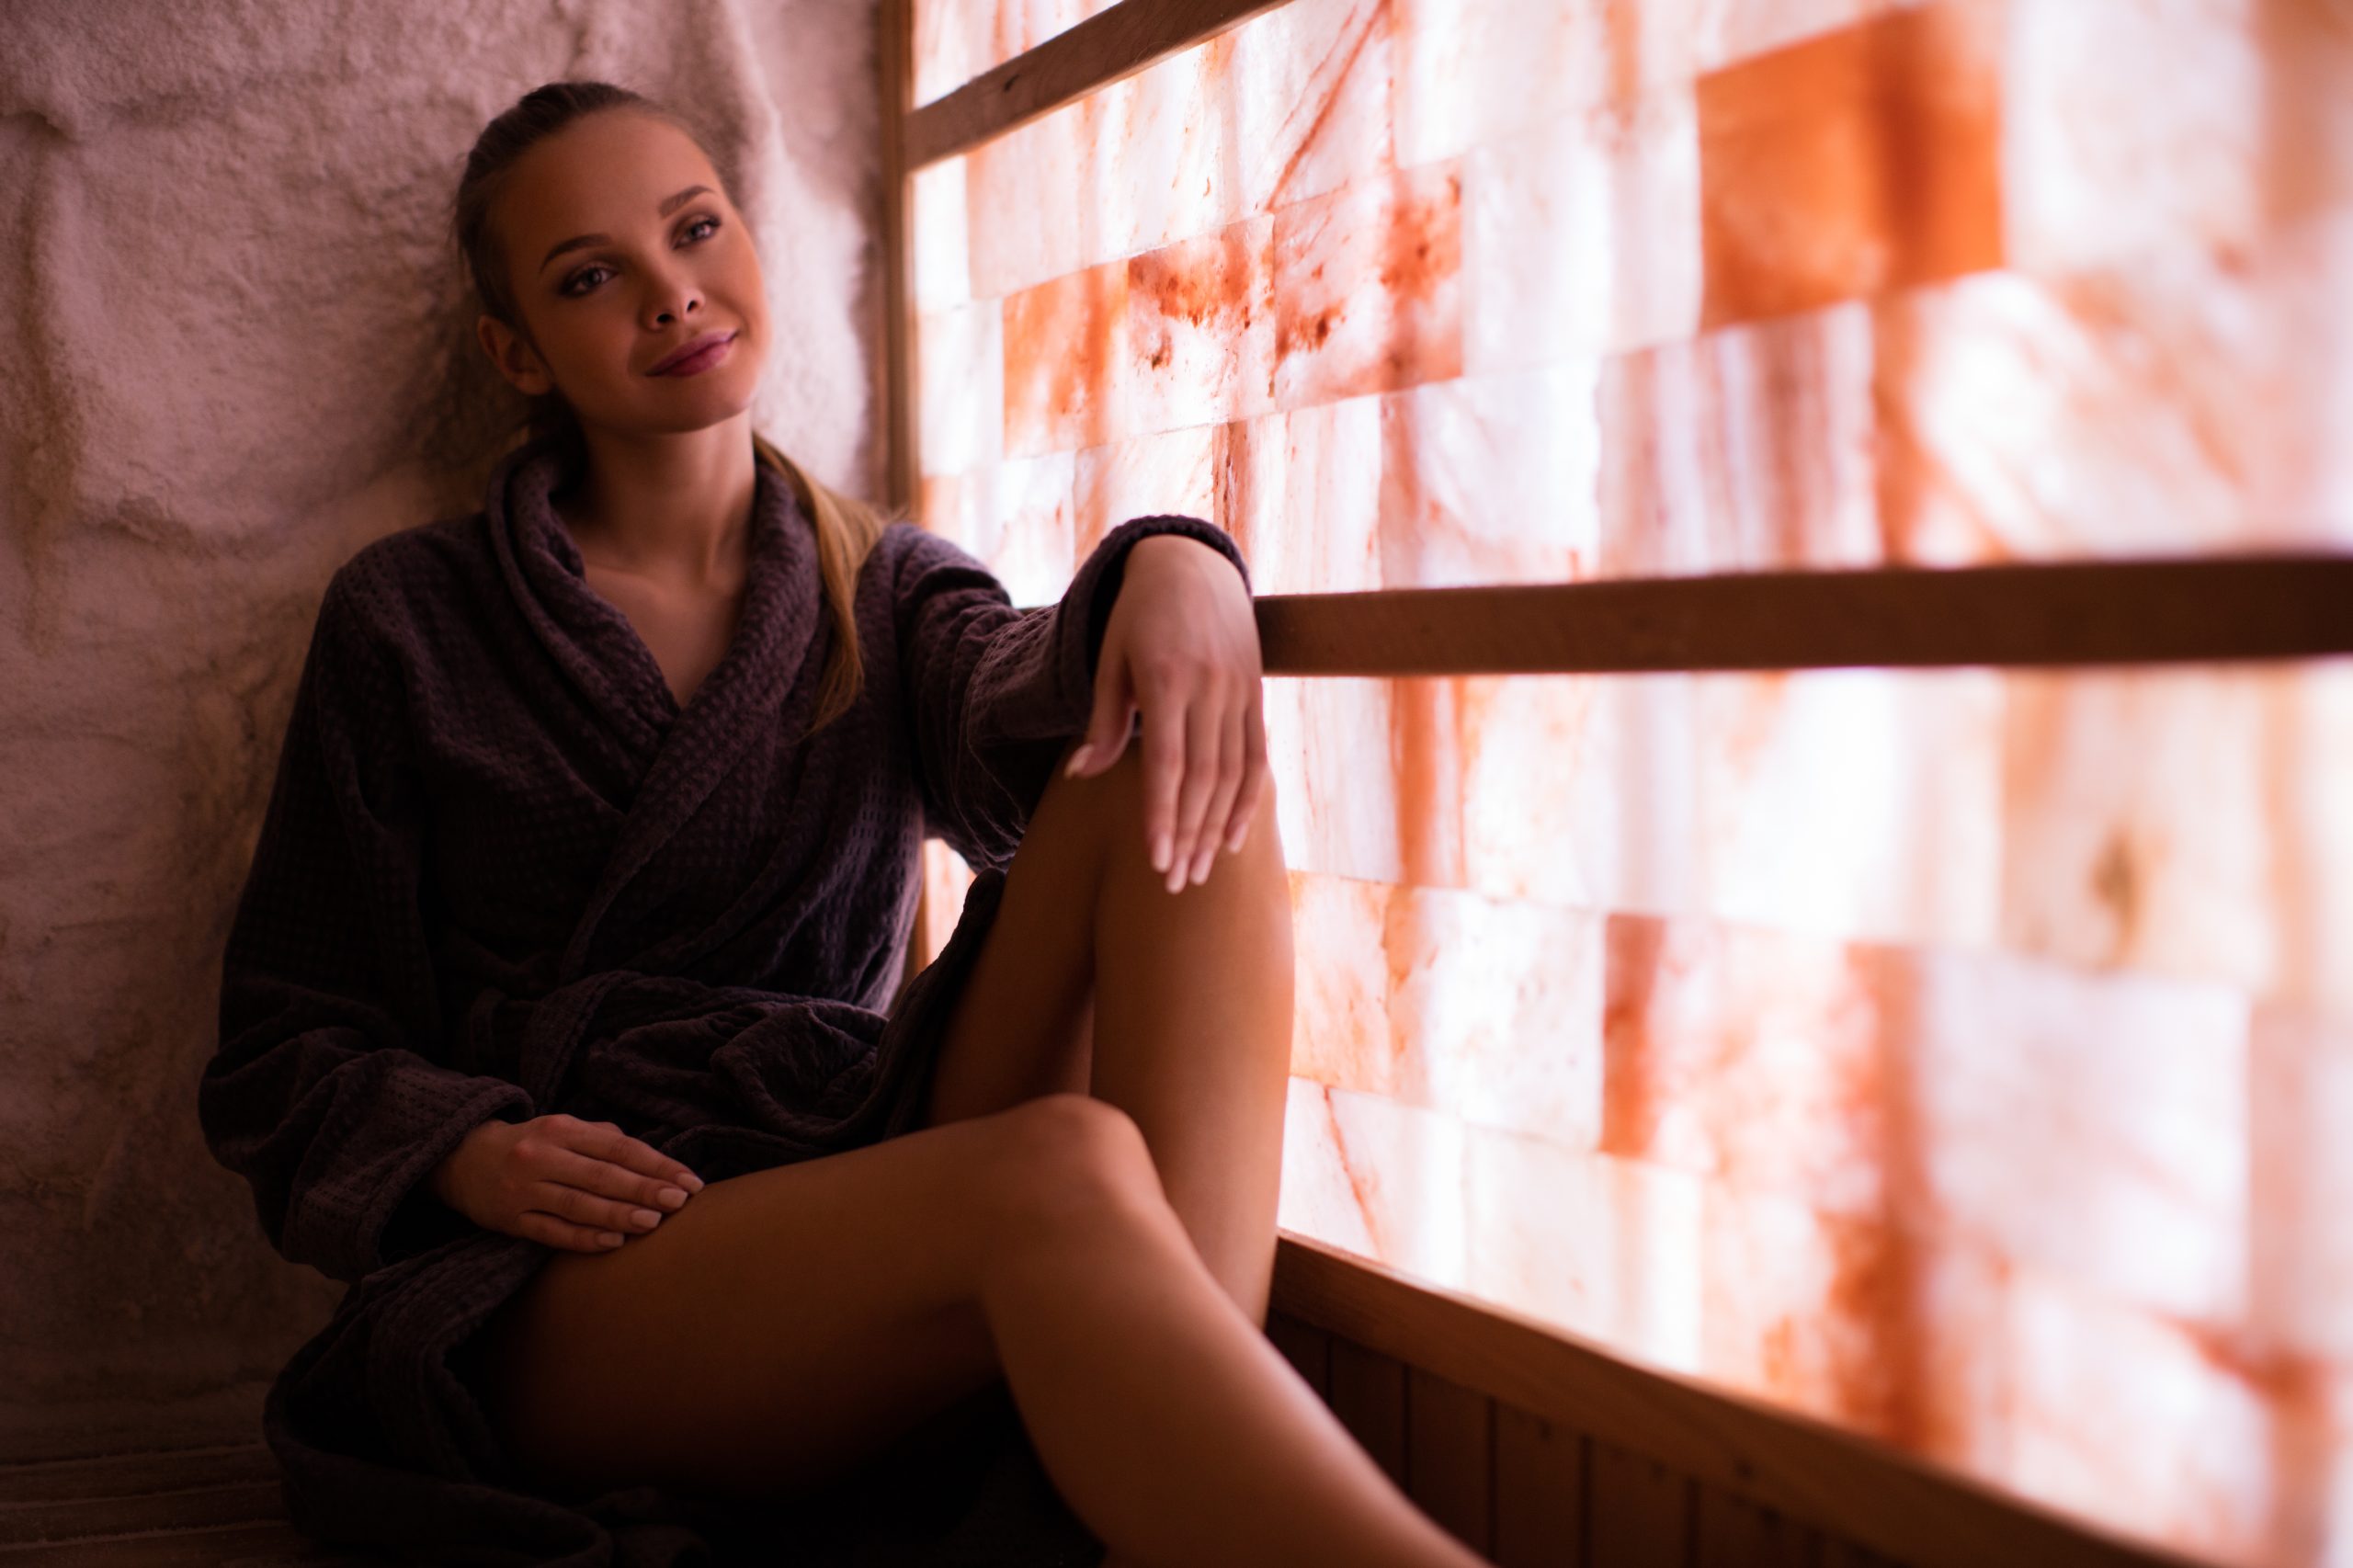 Beautiful young woman relaxing in salt room and enjoying in halotherapy treatment. She wearing bathrobe and sitting on the wooden bench and in front of her is transparent glowing wall made of salt crystals. Photo taken under the available light from glowing wall.